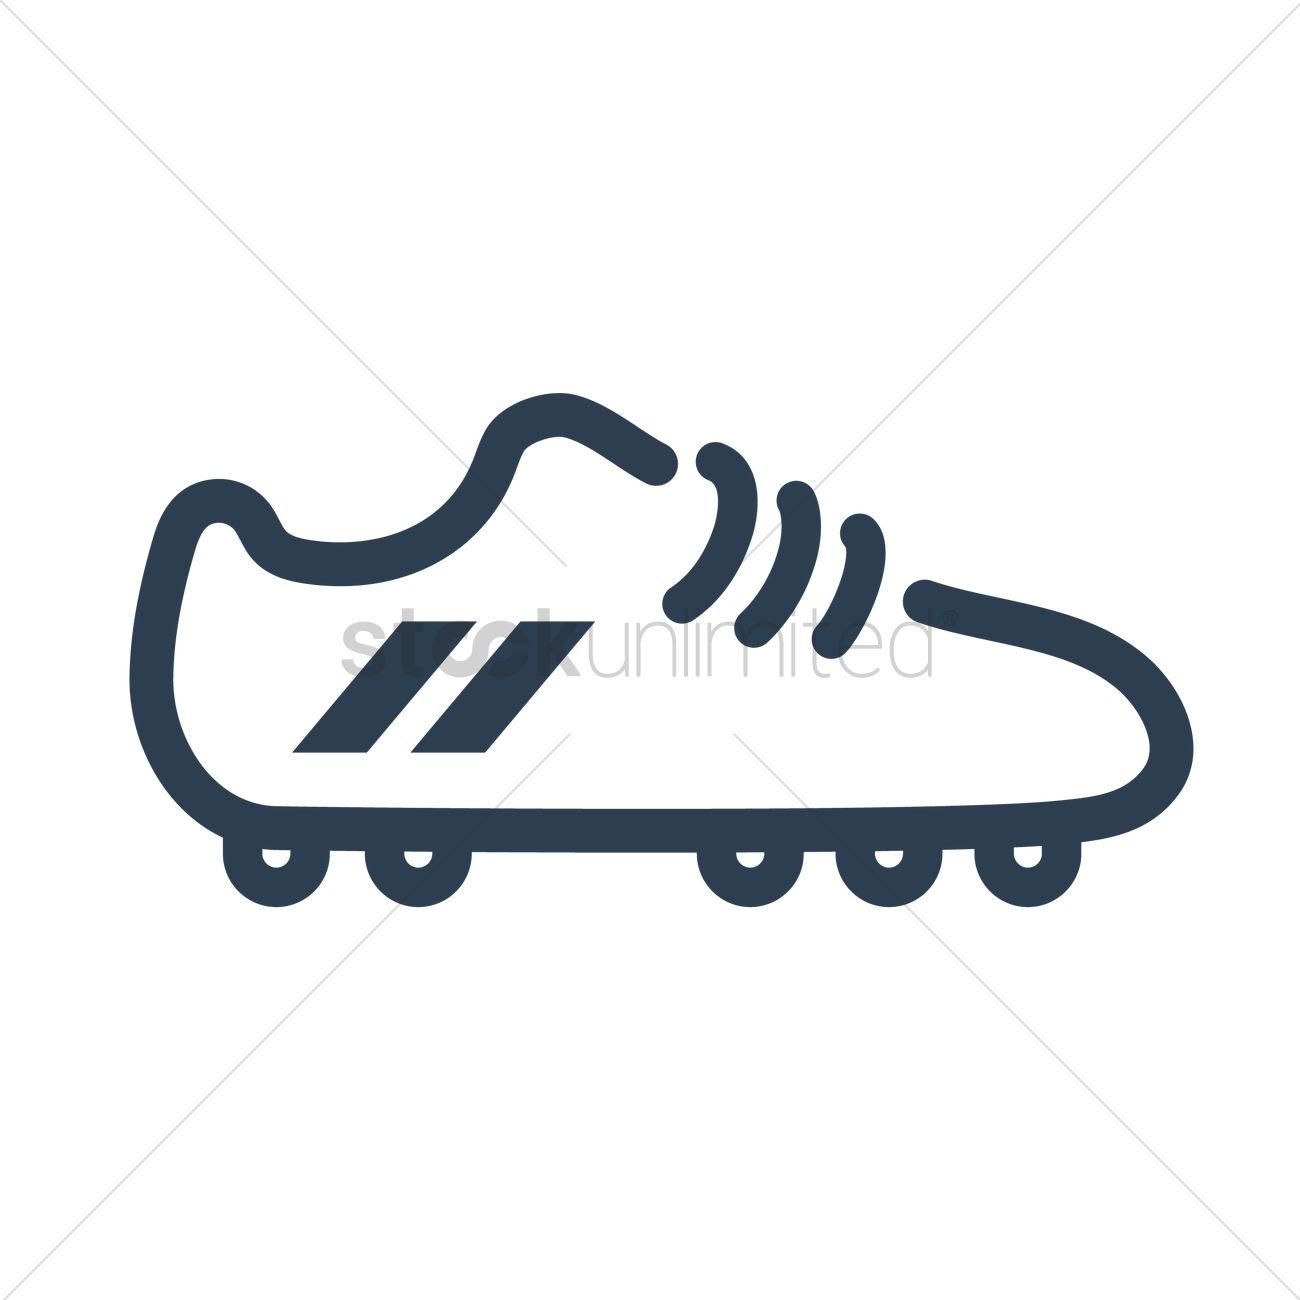 Cleats Logo - Football cleats icon Vector Image